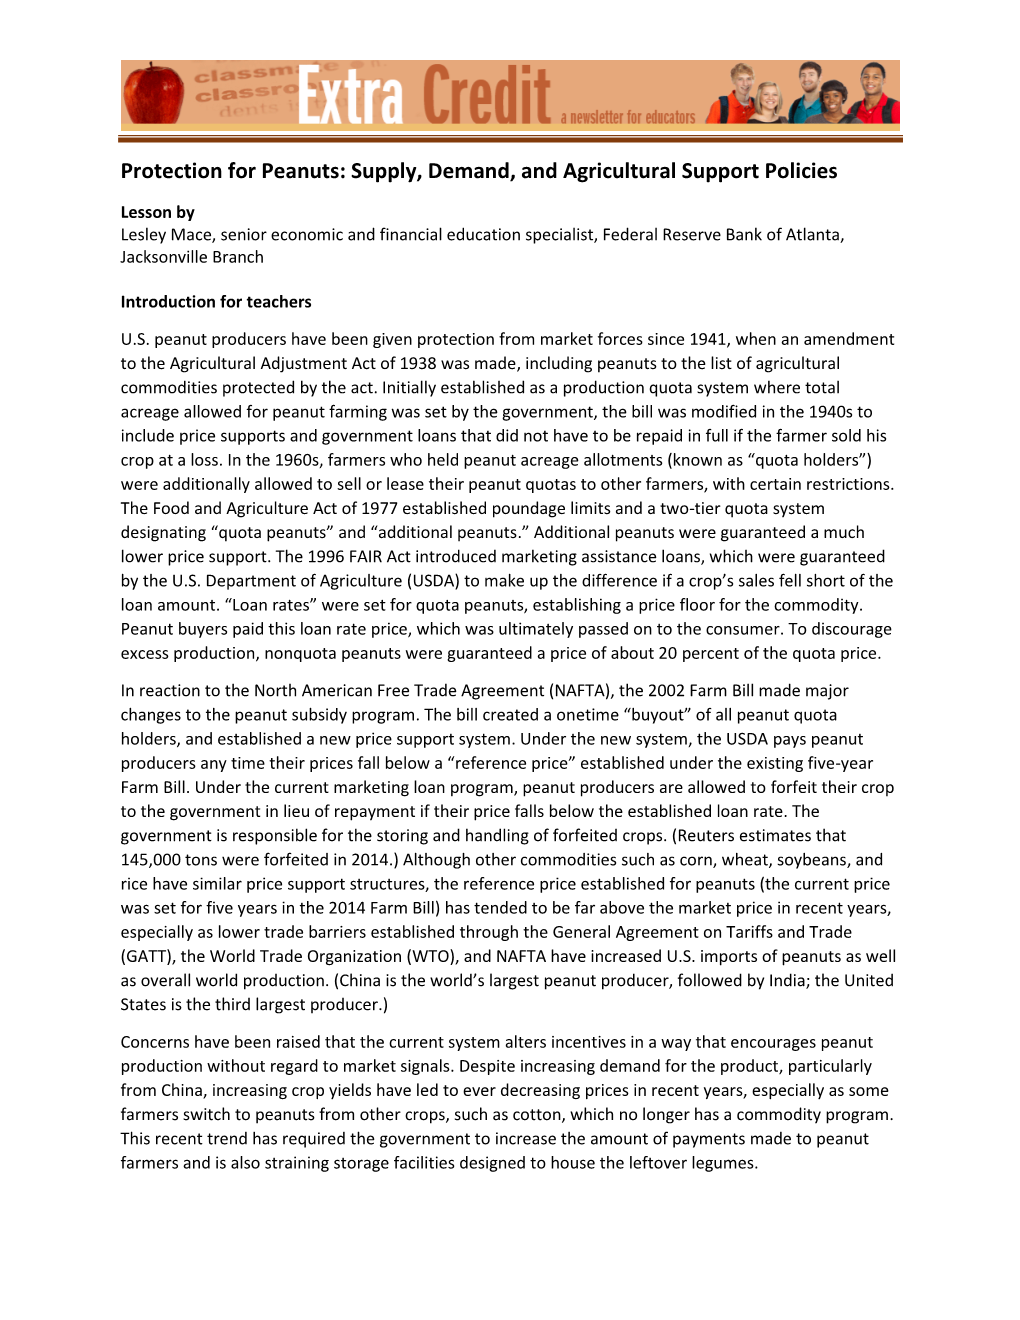 Protection for Peanuts: Supply, Demand, and Agricultural Support Policies